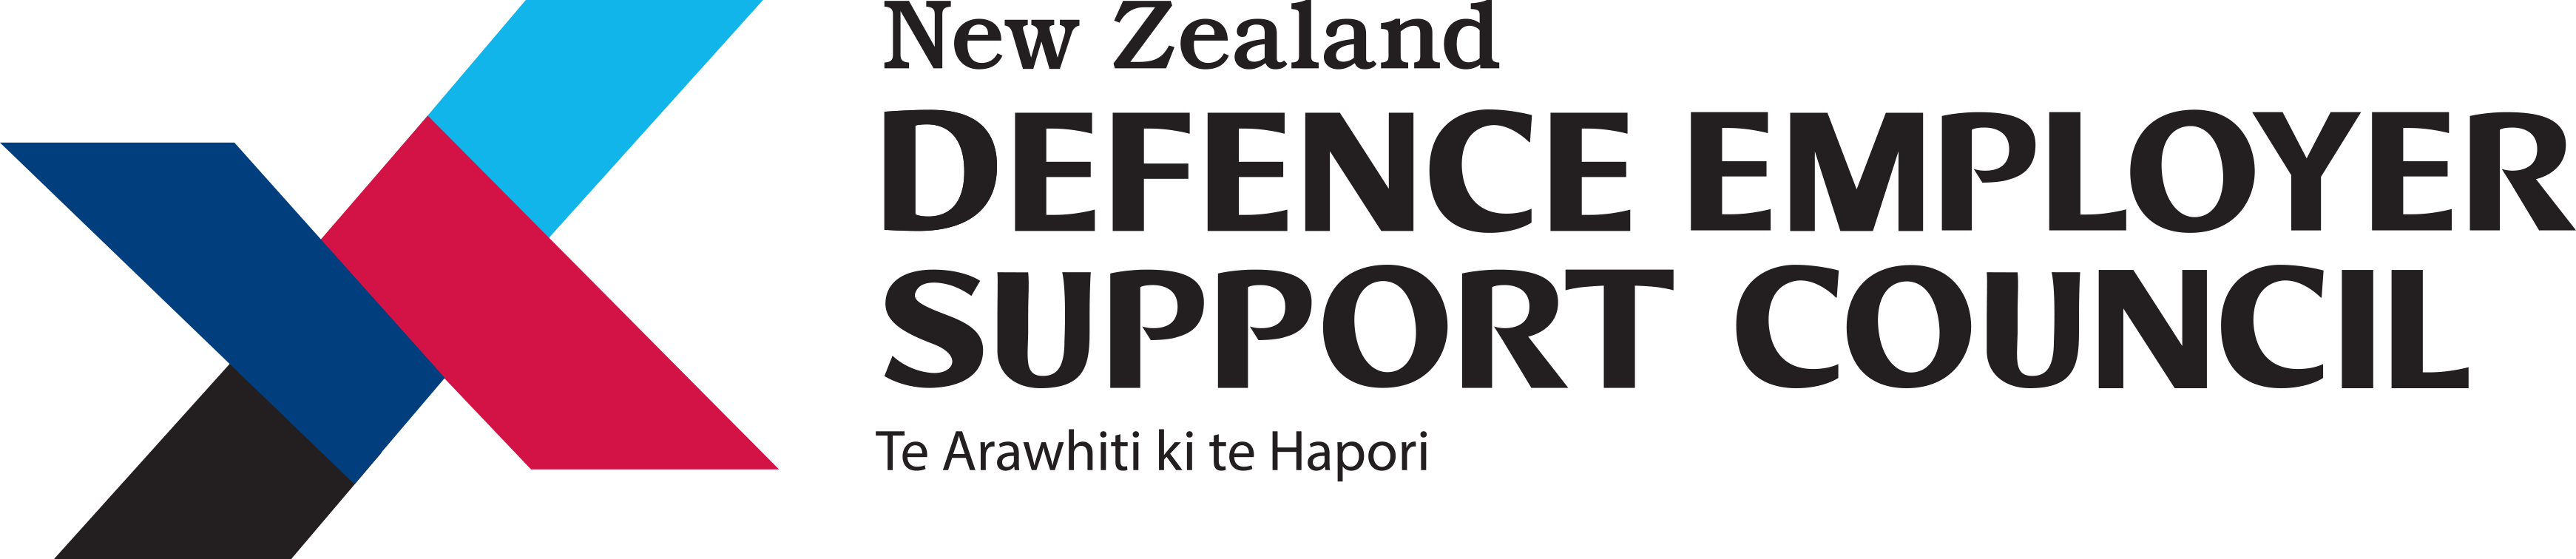 Defence Employer Support Council logo